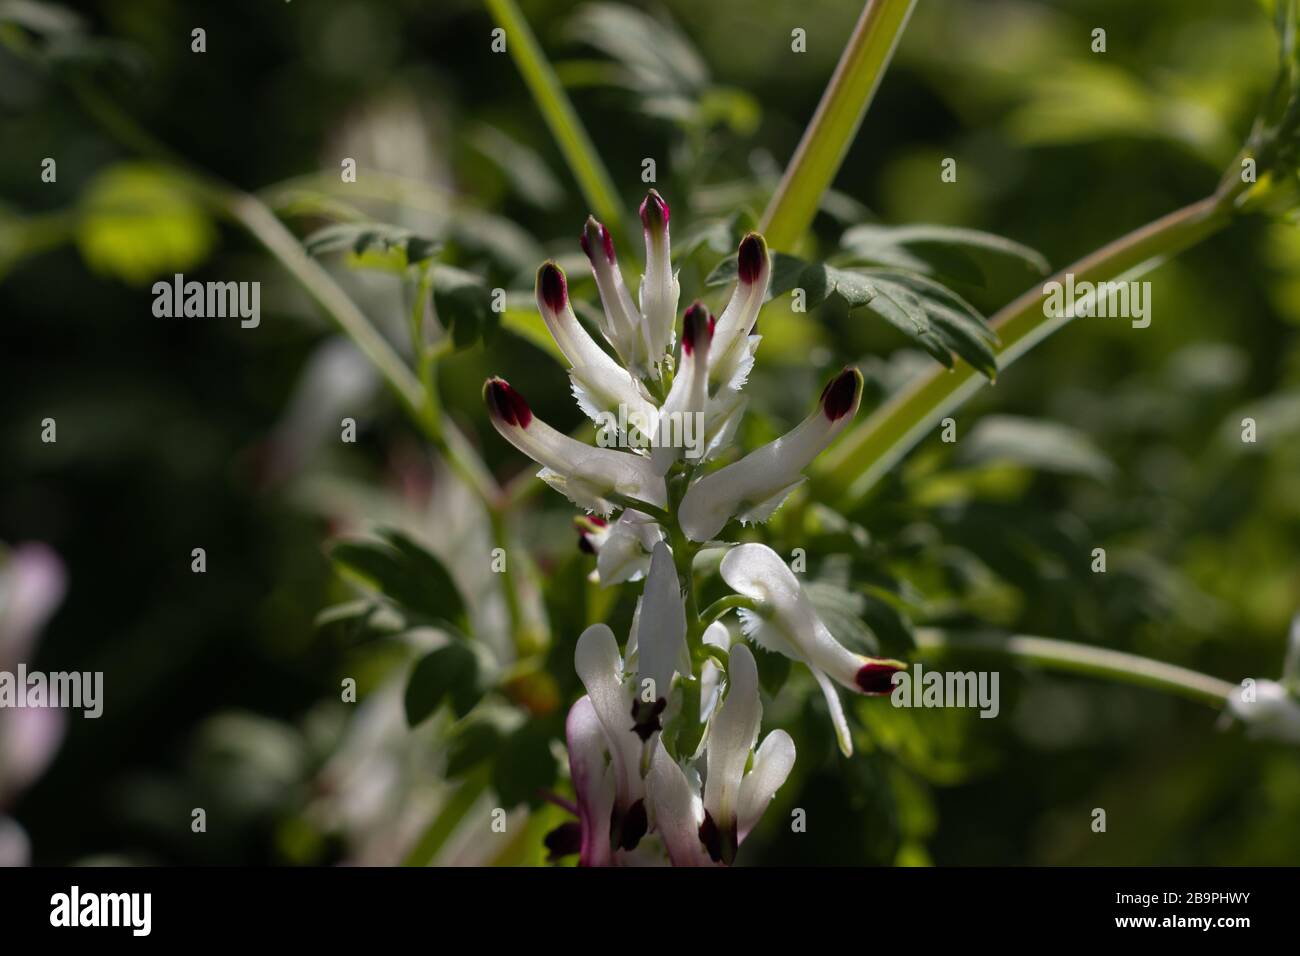 Close-up image of Fumaria capreolata, the white ramping fumitory, white and purple flower on a blurred green background Stock Photo